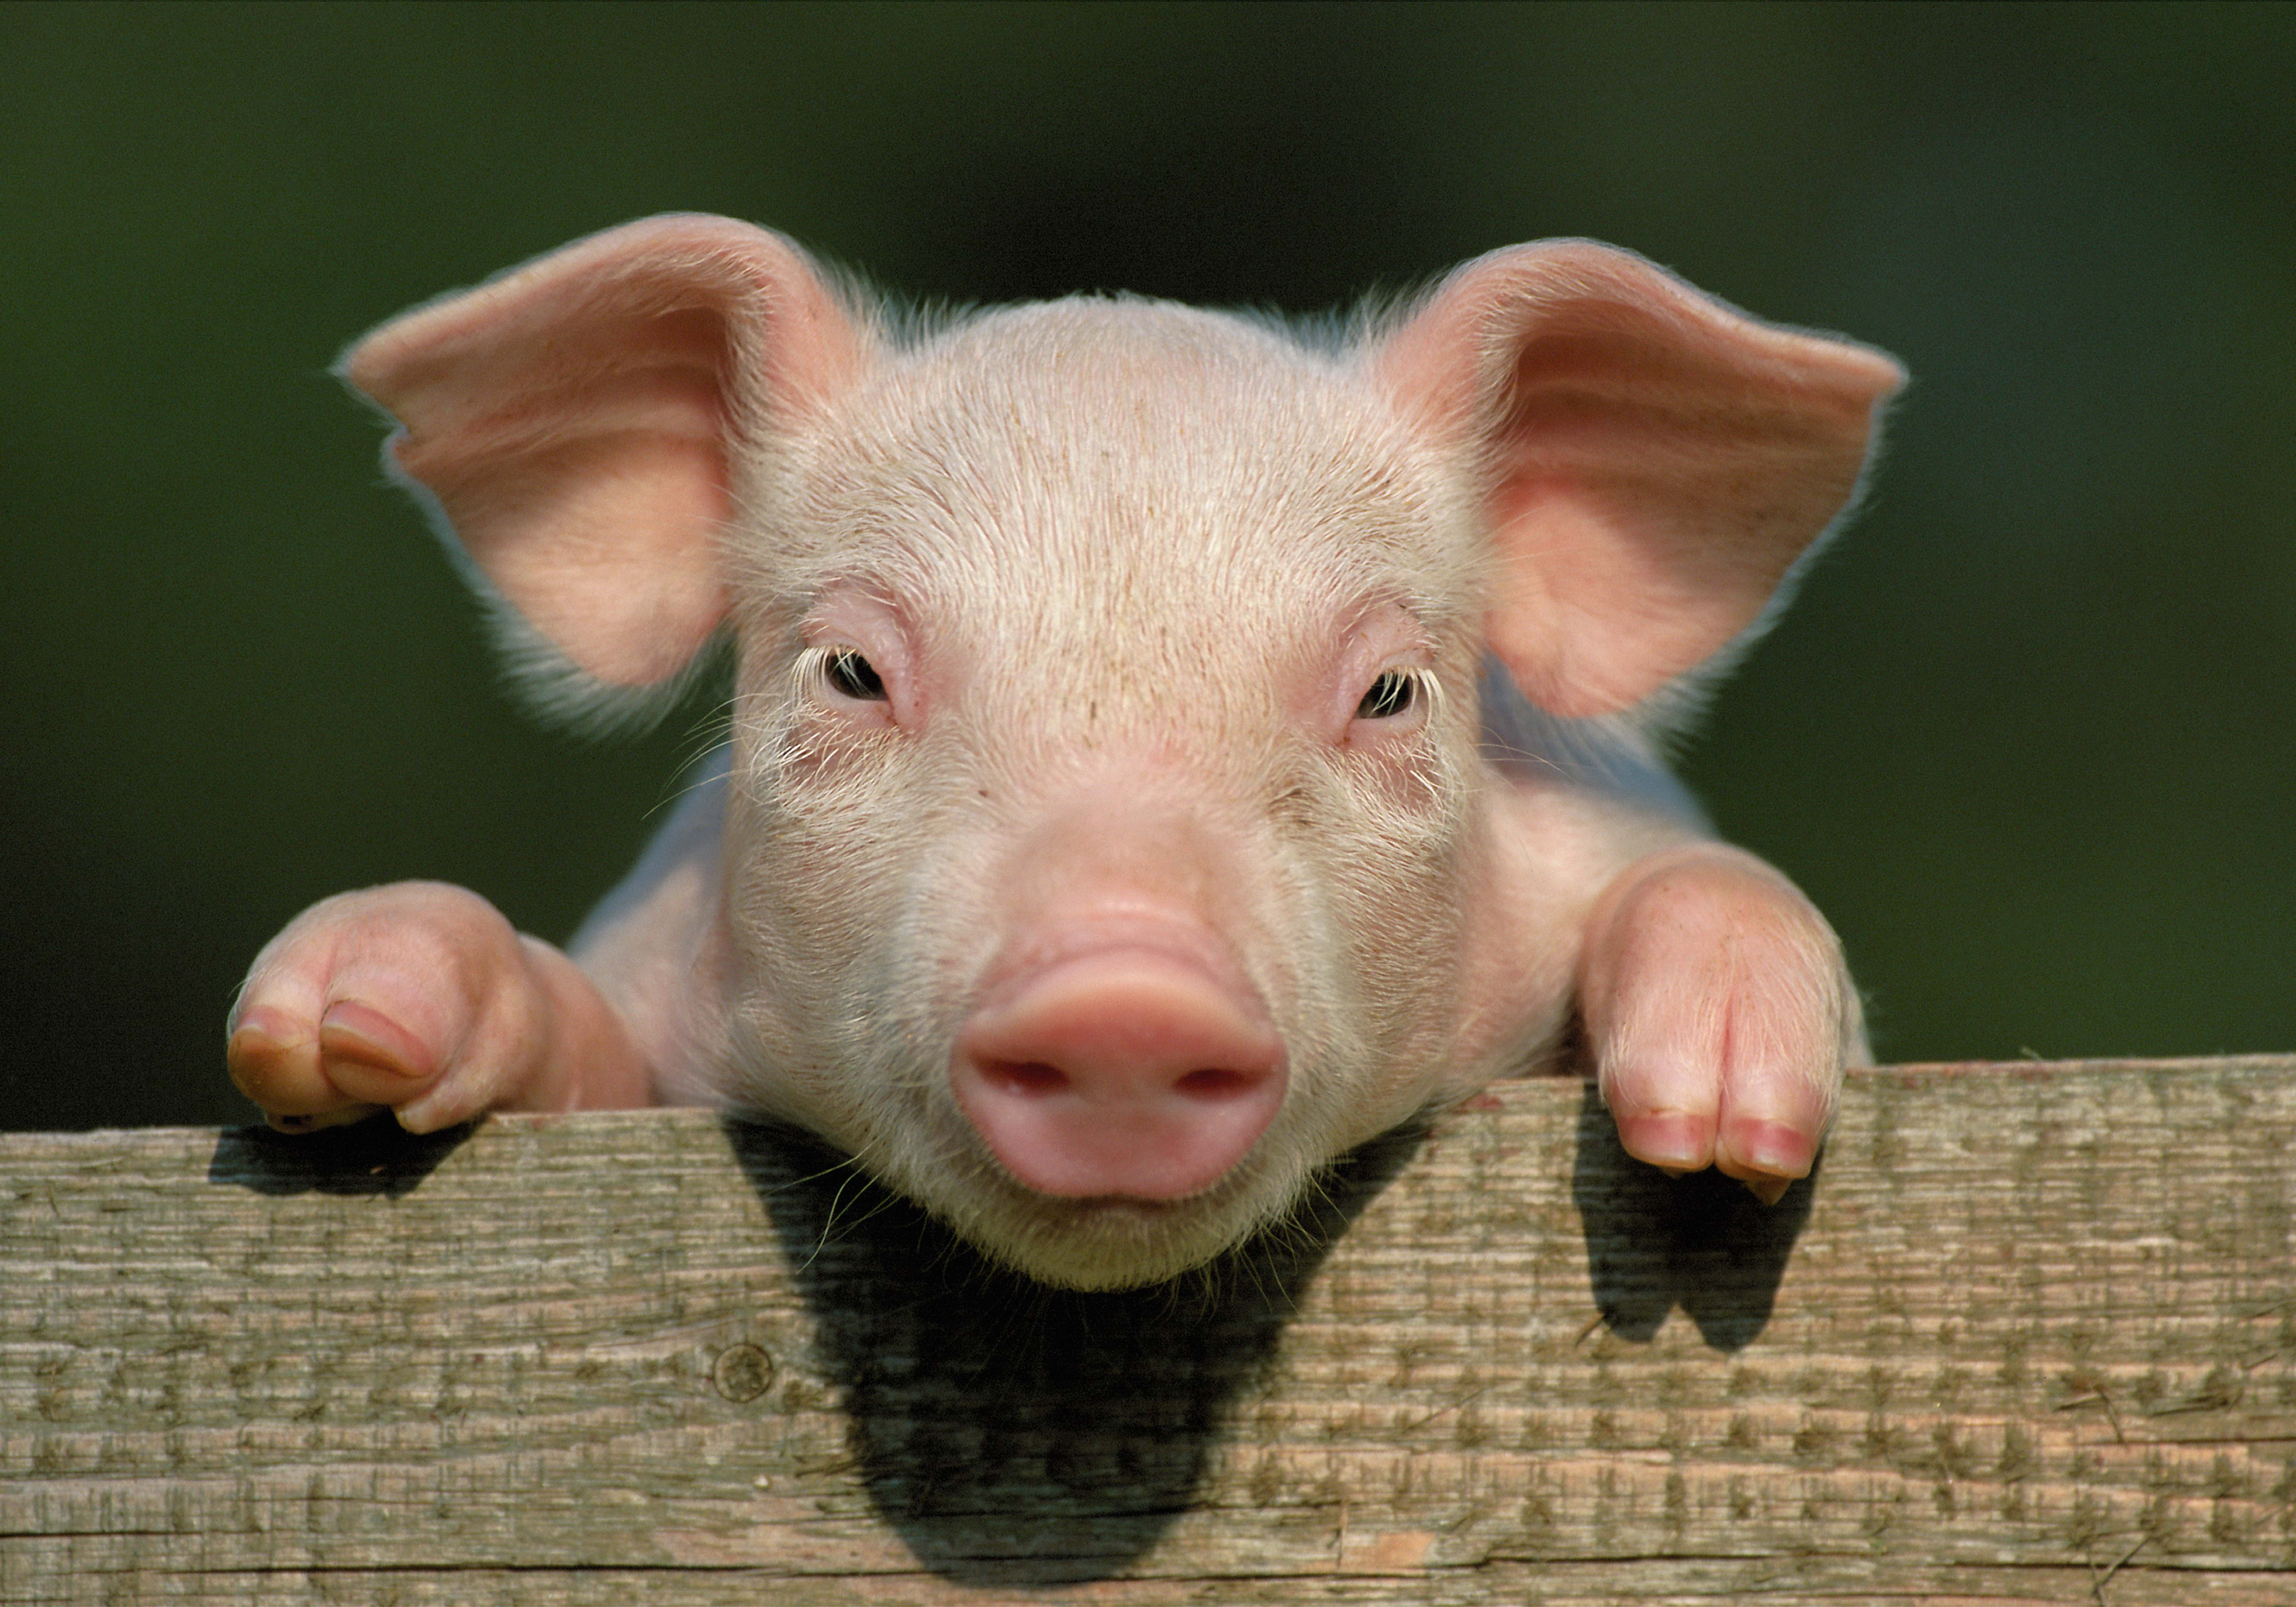 136179 Screensavers and Wallpapers Face for phone. Download animals, close-up, face, pig, hooves, hoof, piglet, out of town, suburb pictures for free